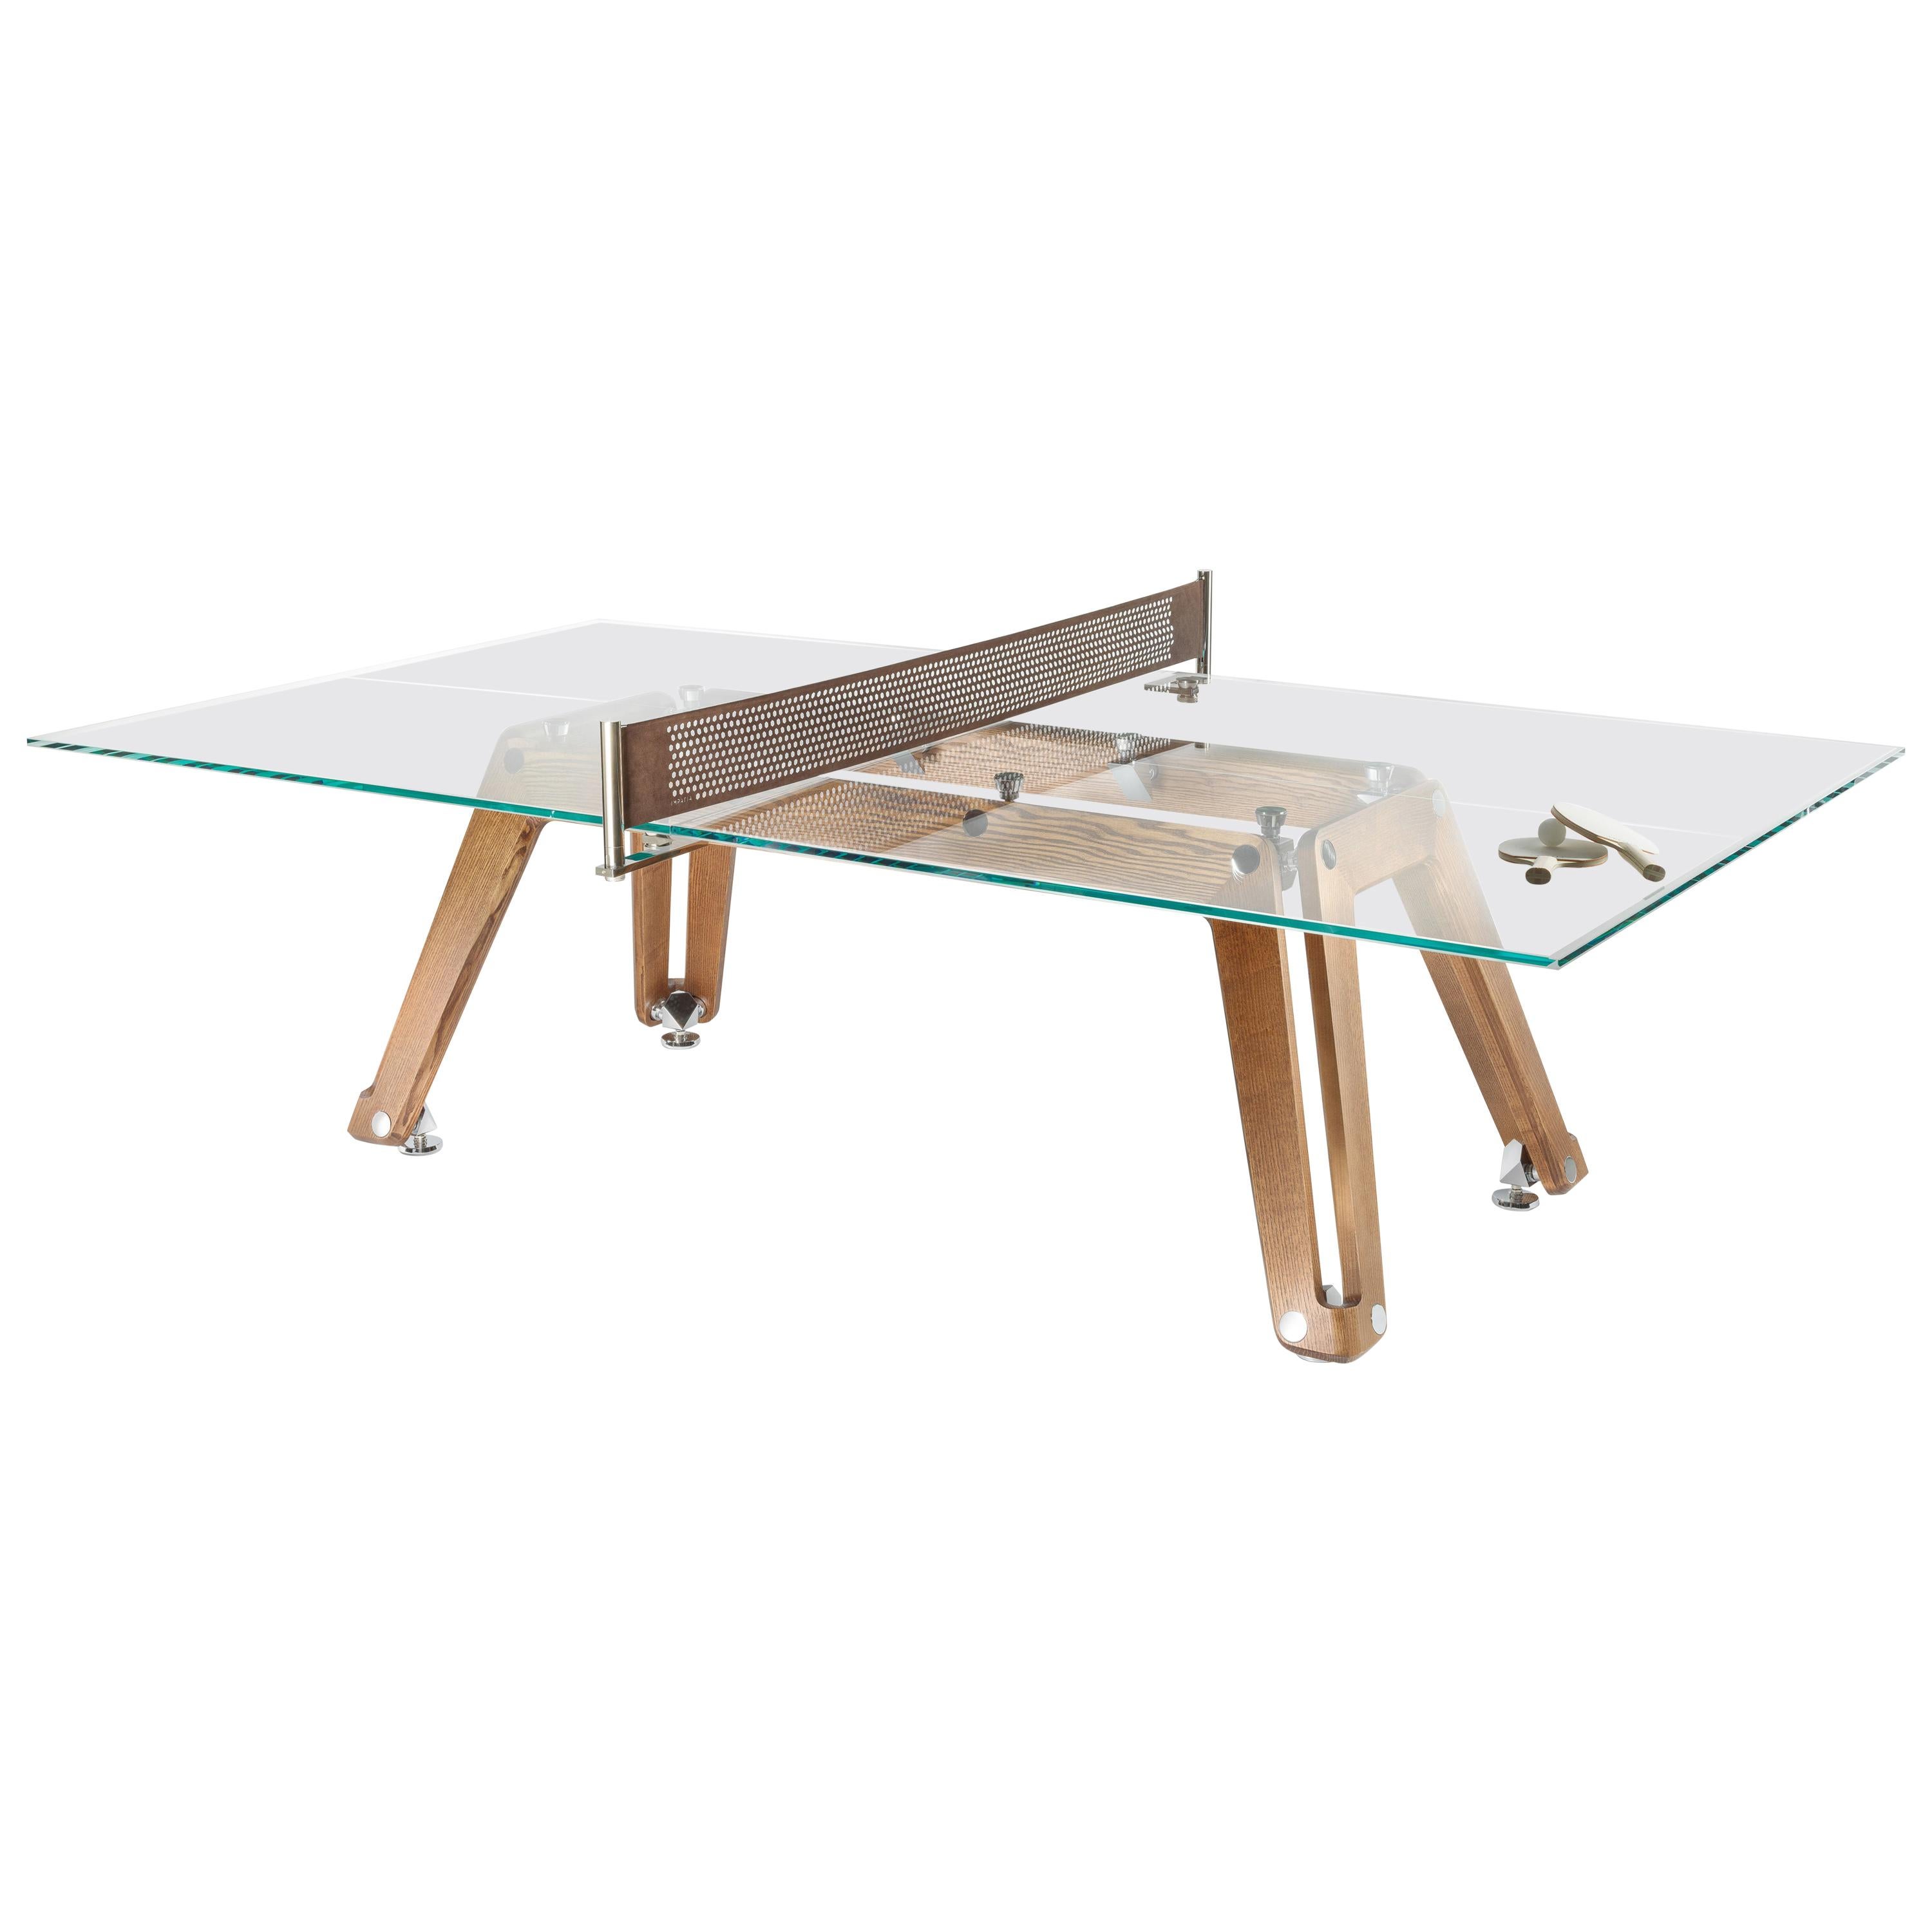 Lungolinea Wood Edition Ping Pong Table by Impatia